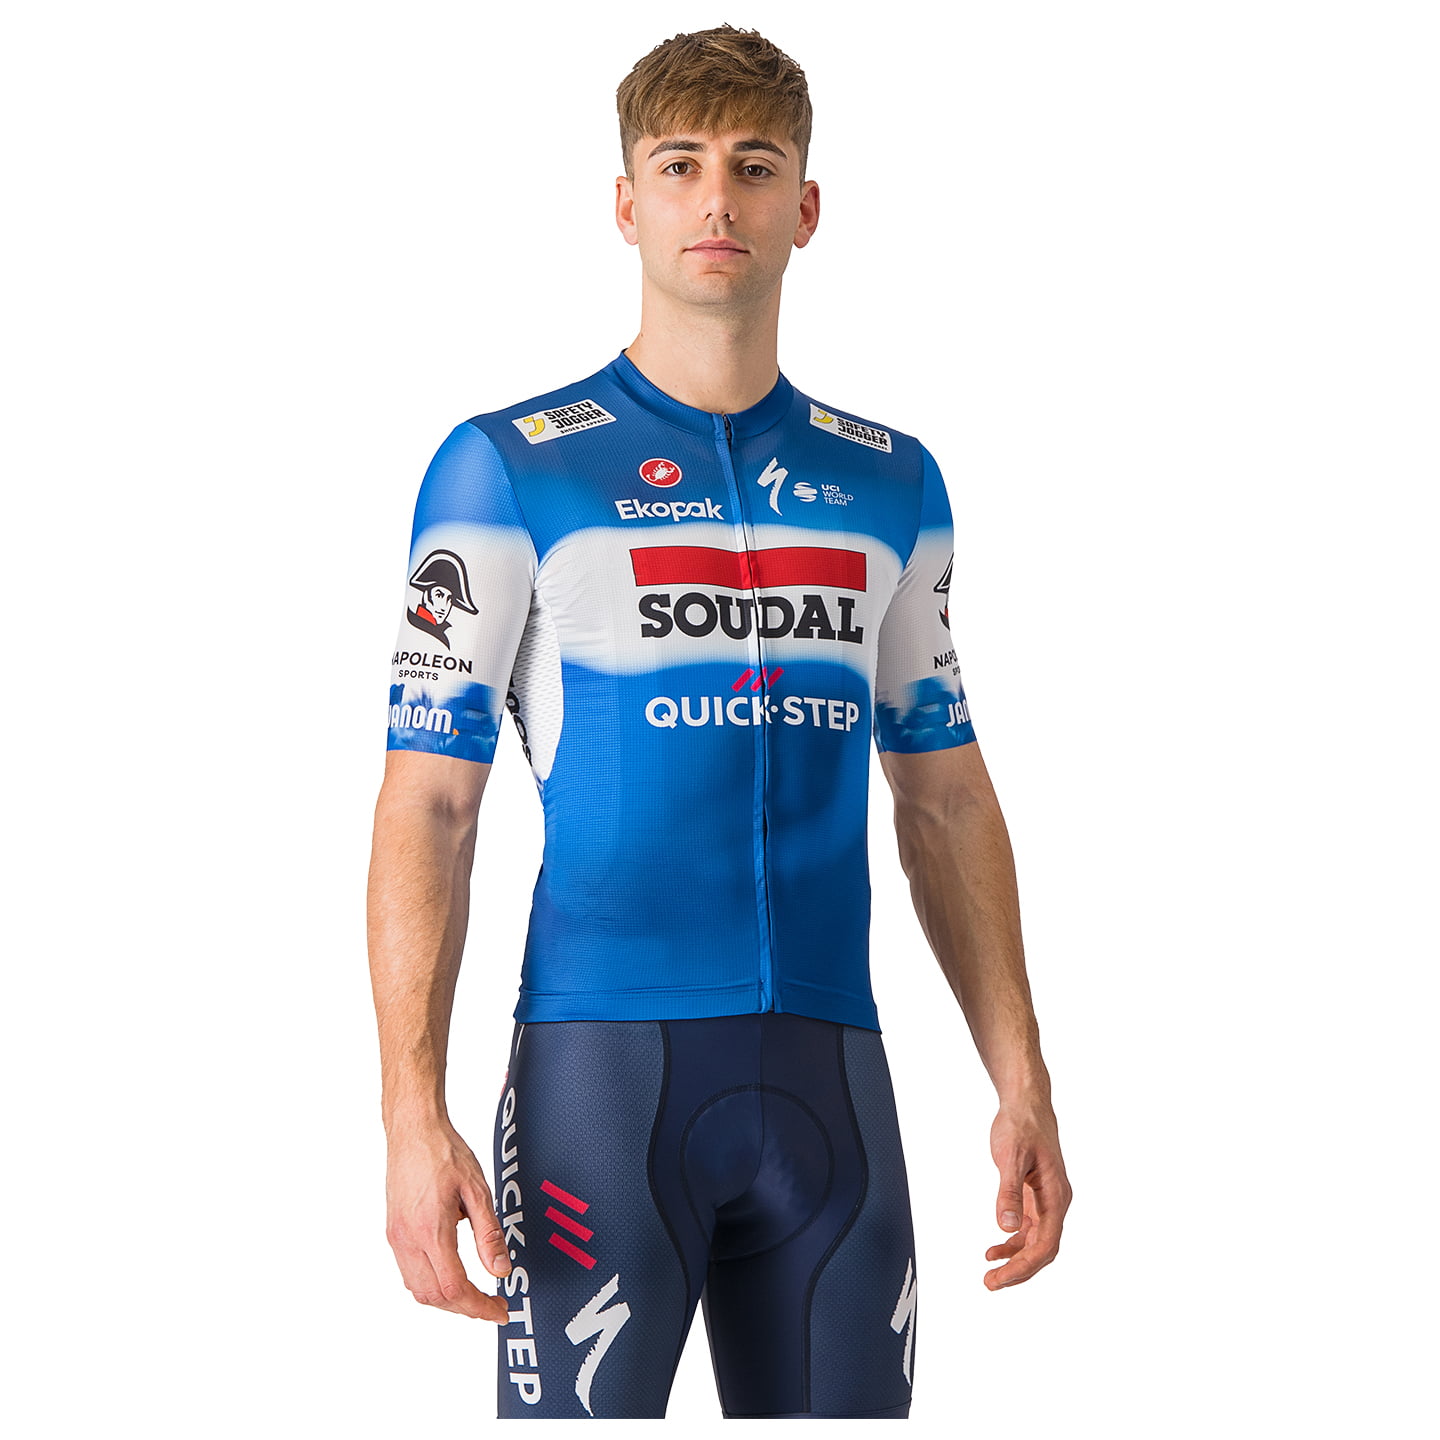 SOUDAL QUICK-STEP 2024 Short Sleeve Jersey, for men, size S, Cycling jersey, Cycling clothing